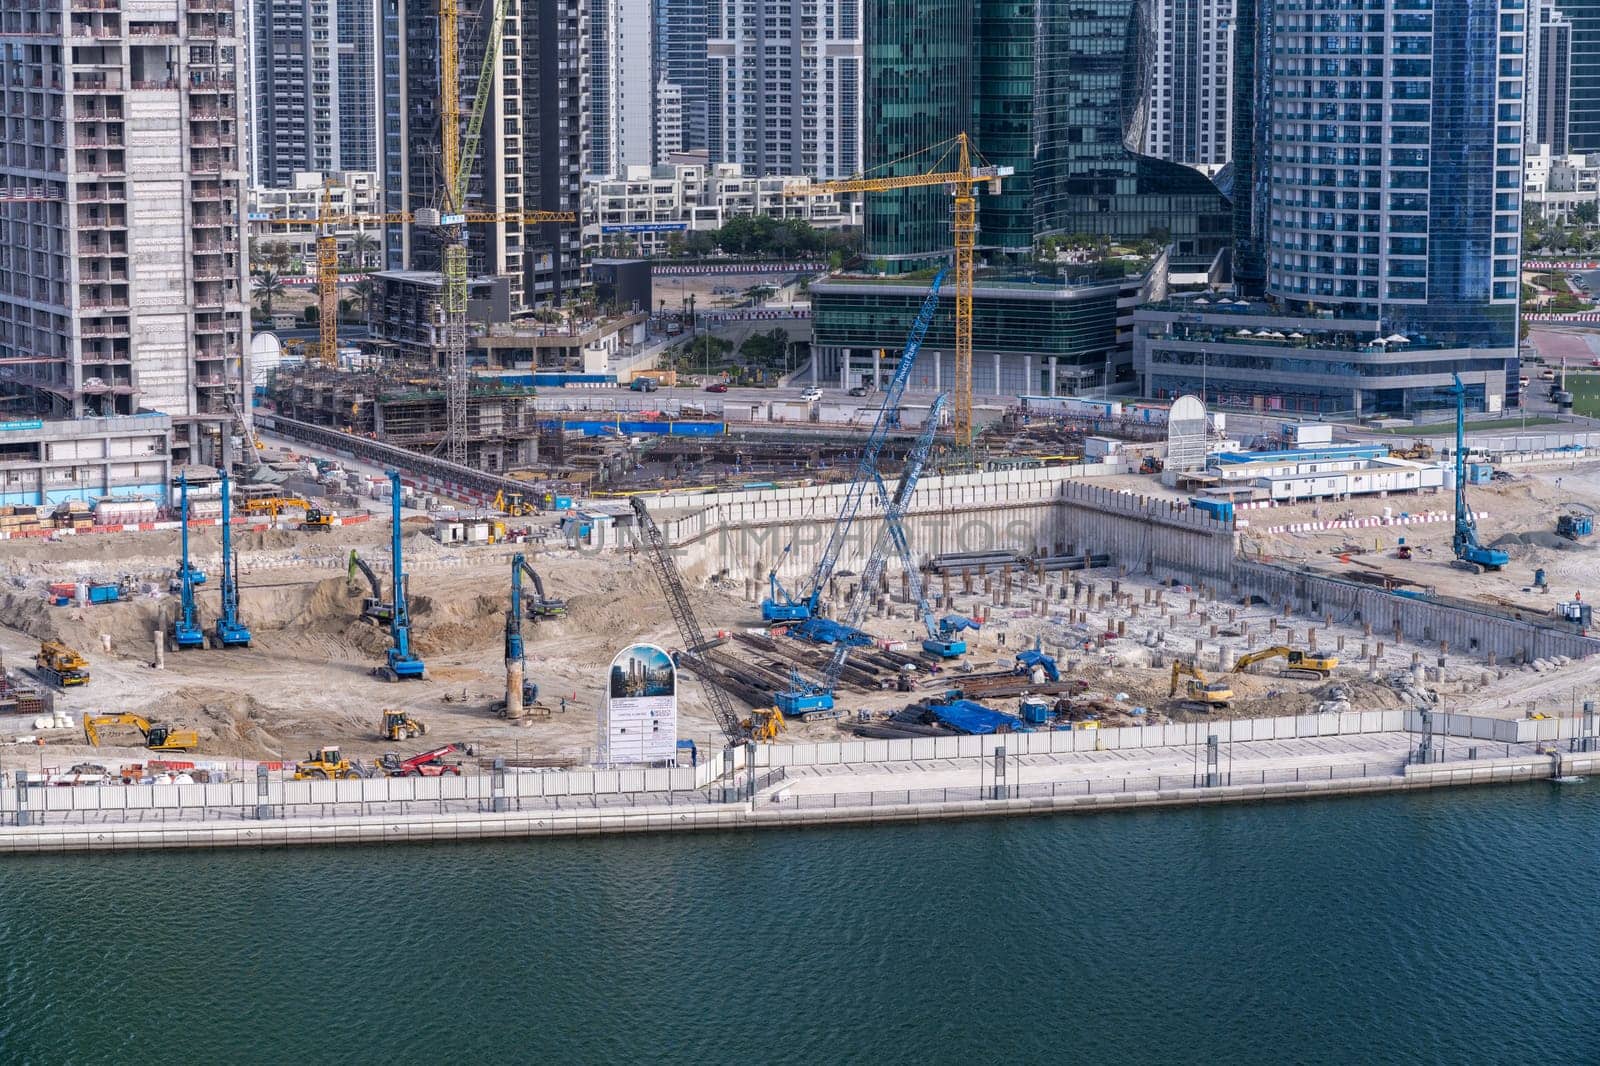 Pile driving for foundations in Dubai business bay district by steheap